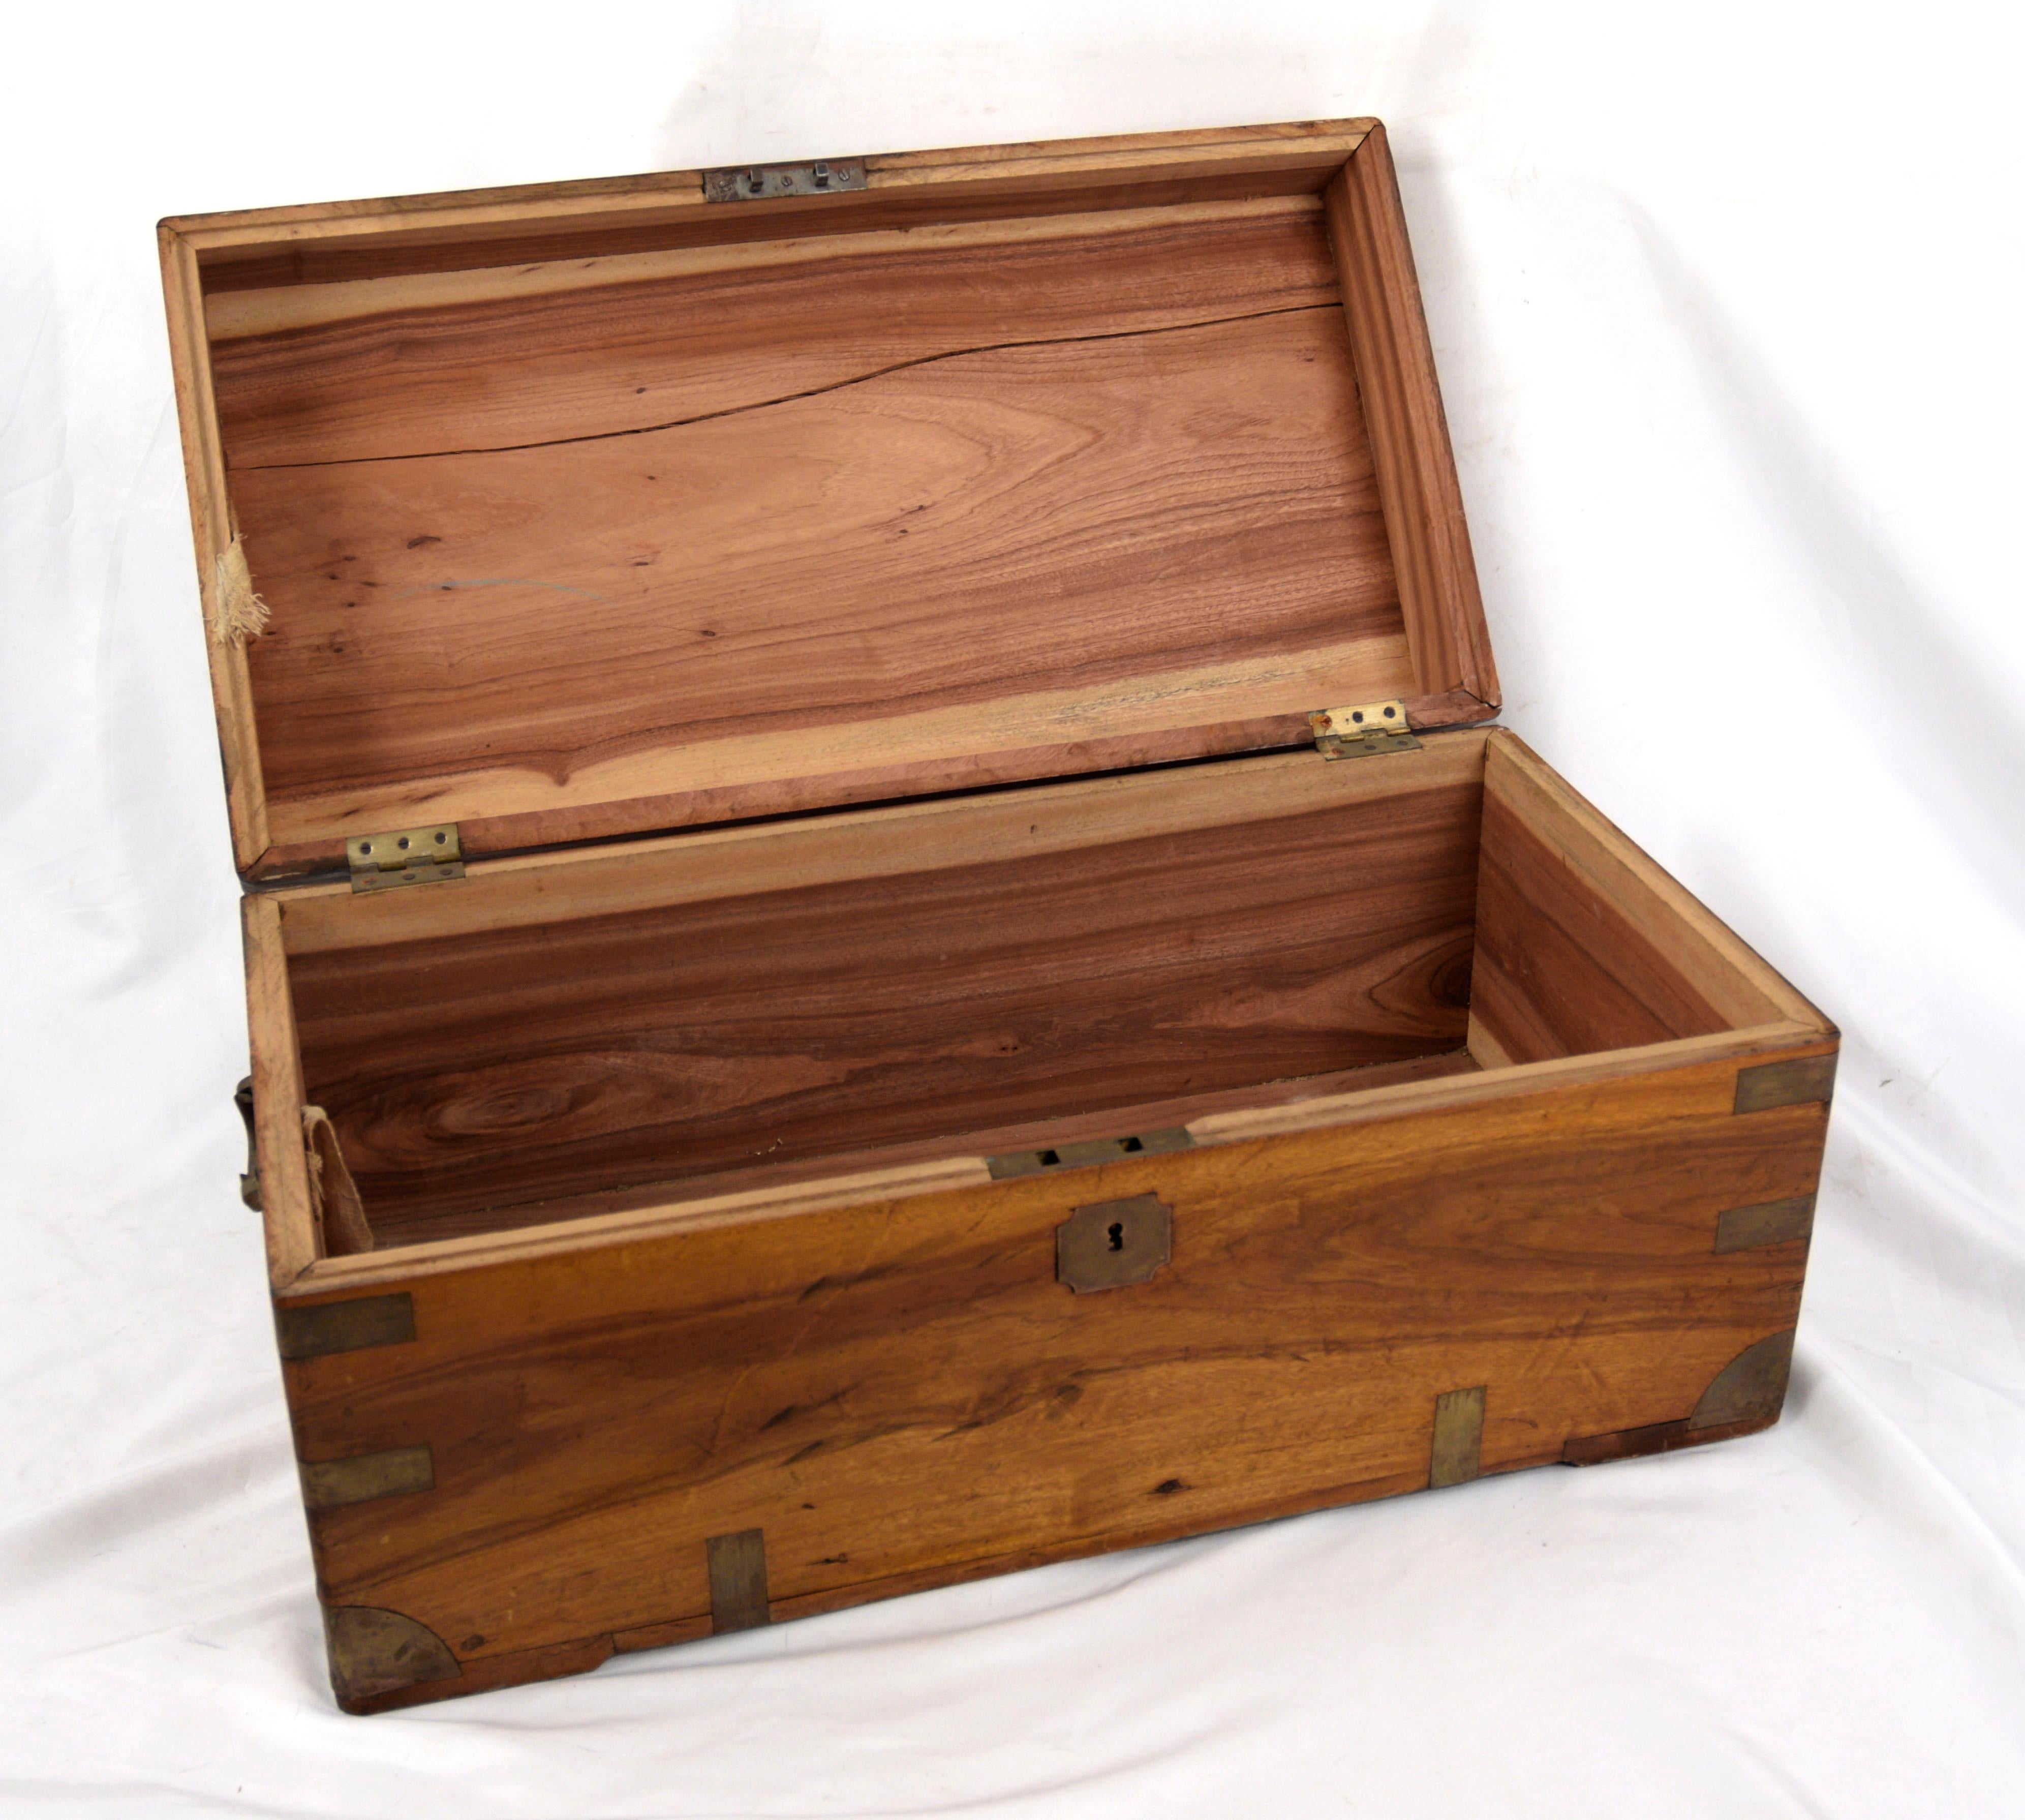 Camphorwood Campaign Chest - Late 19th Century Chinese Export Case (Medium) For Sale 3